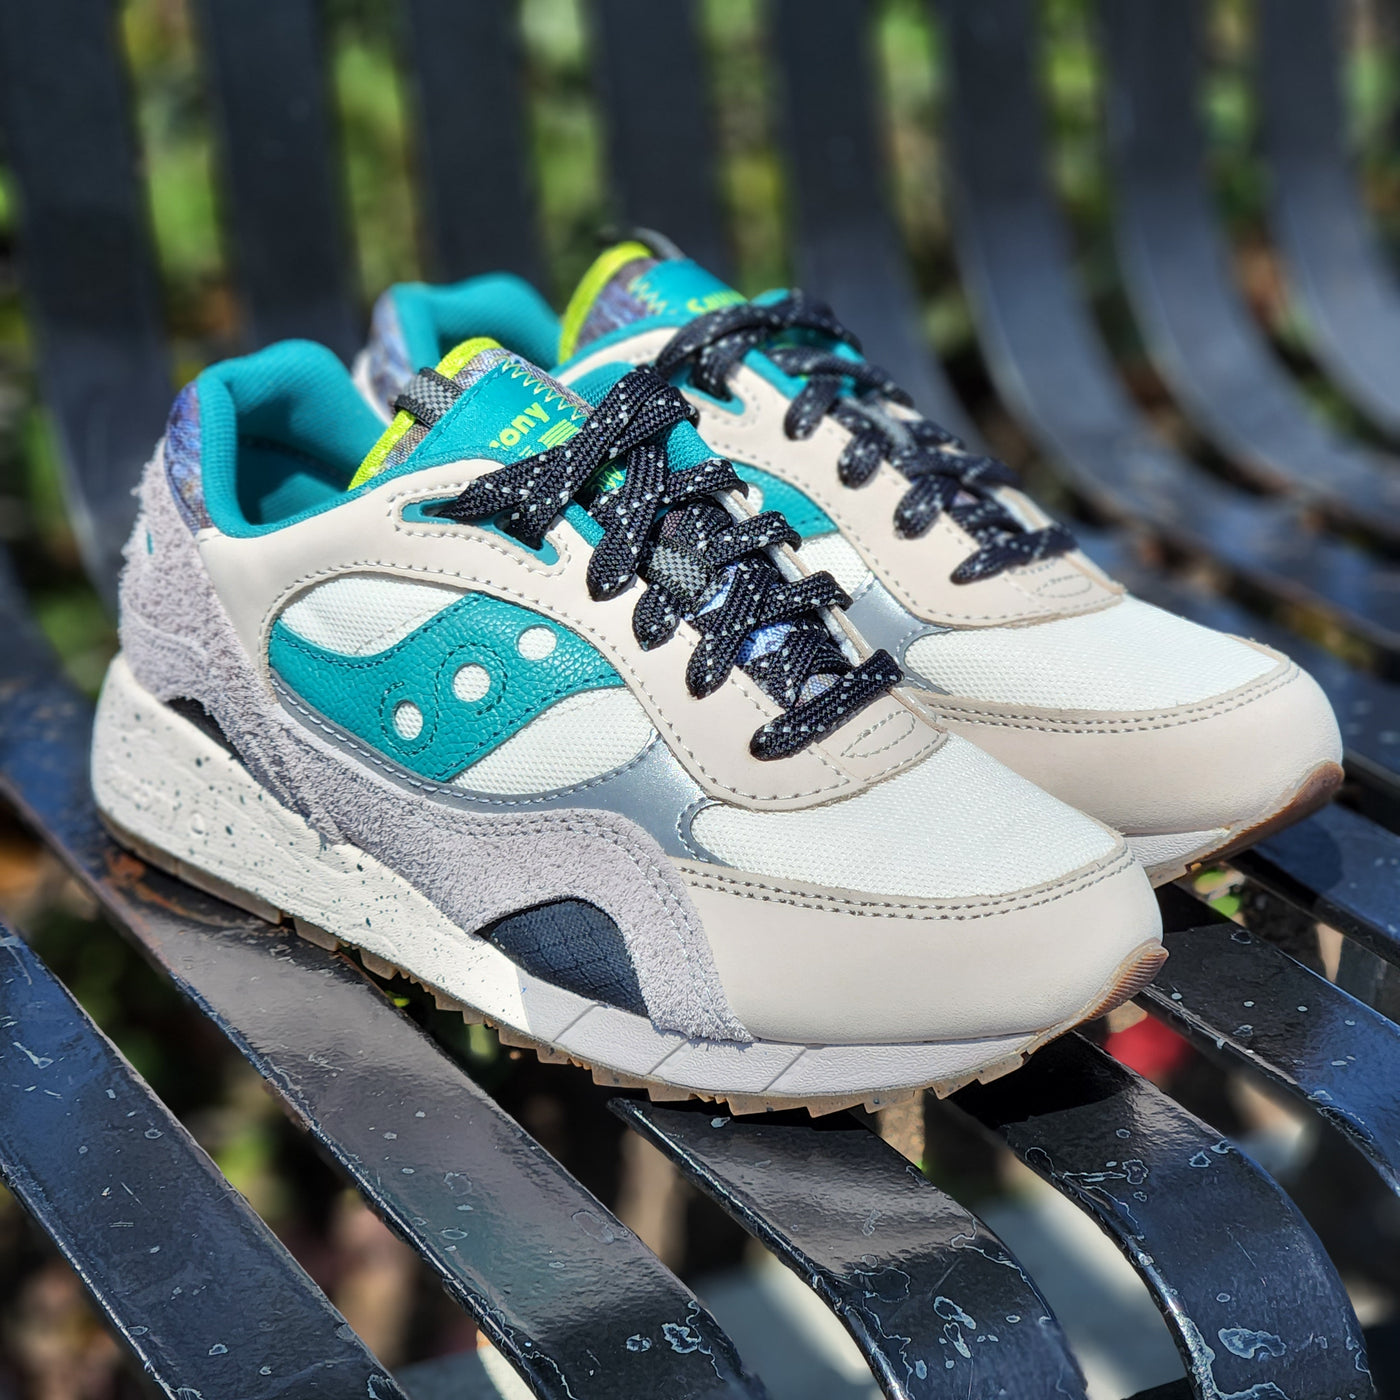 Saucony Shadow 6000 Reflect Camo Release Date